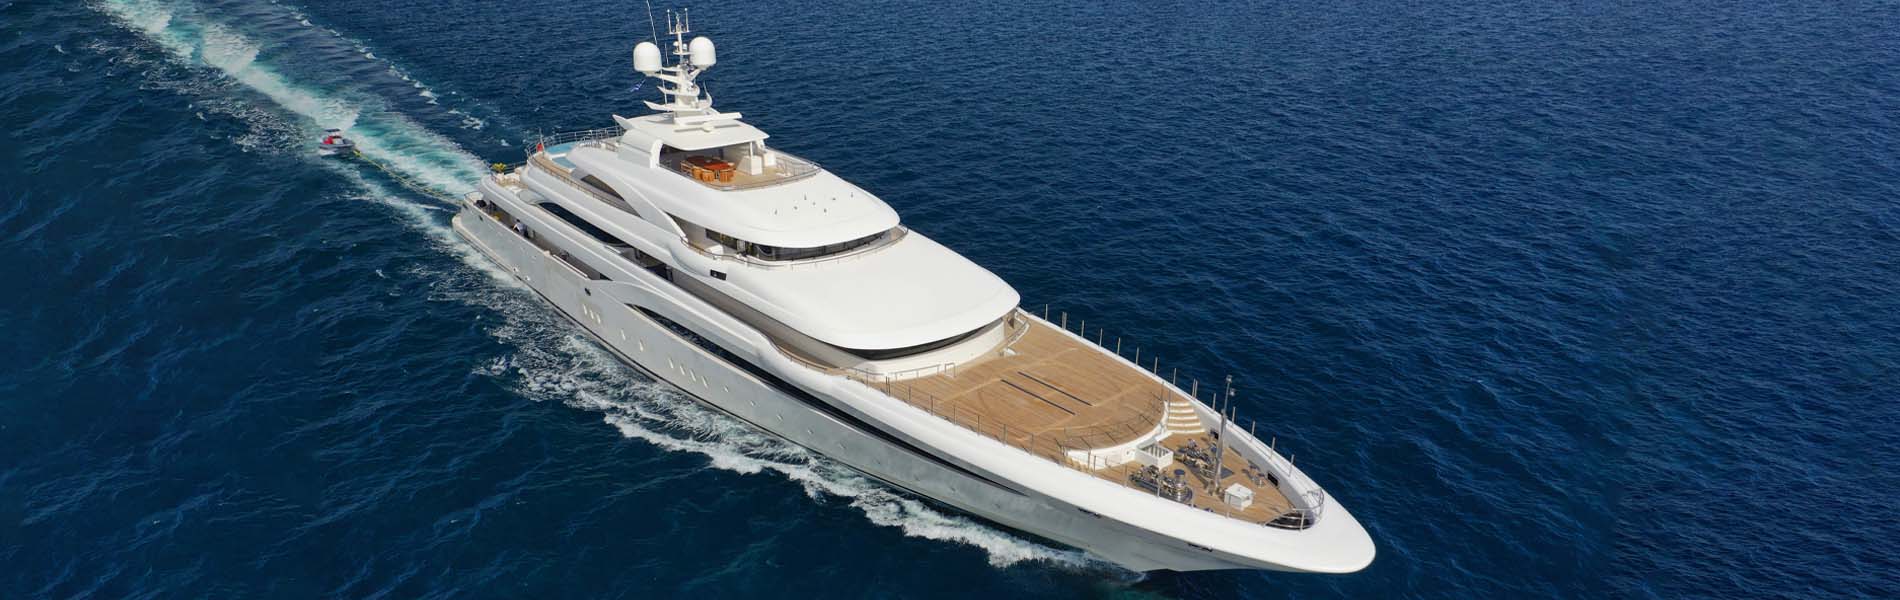 super yacht security global